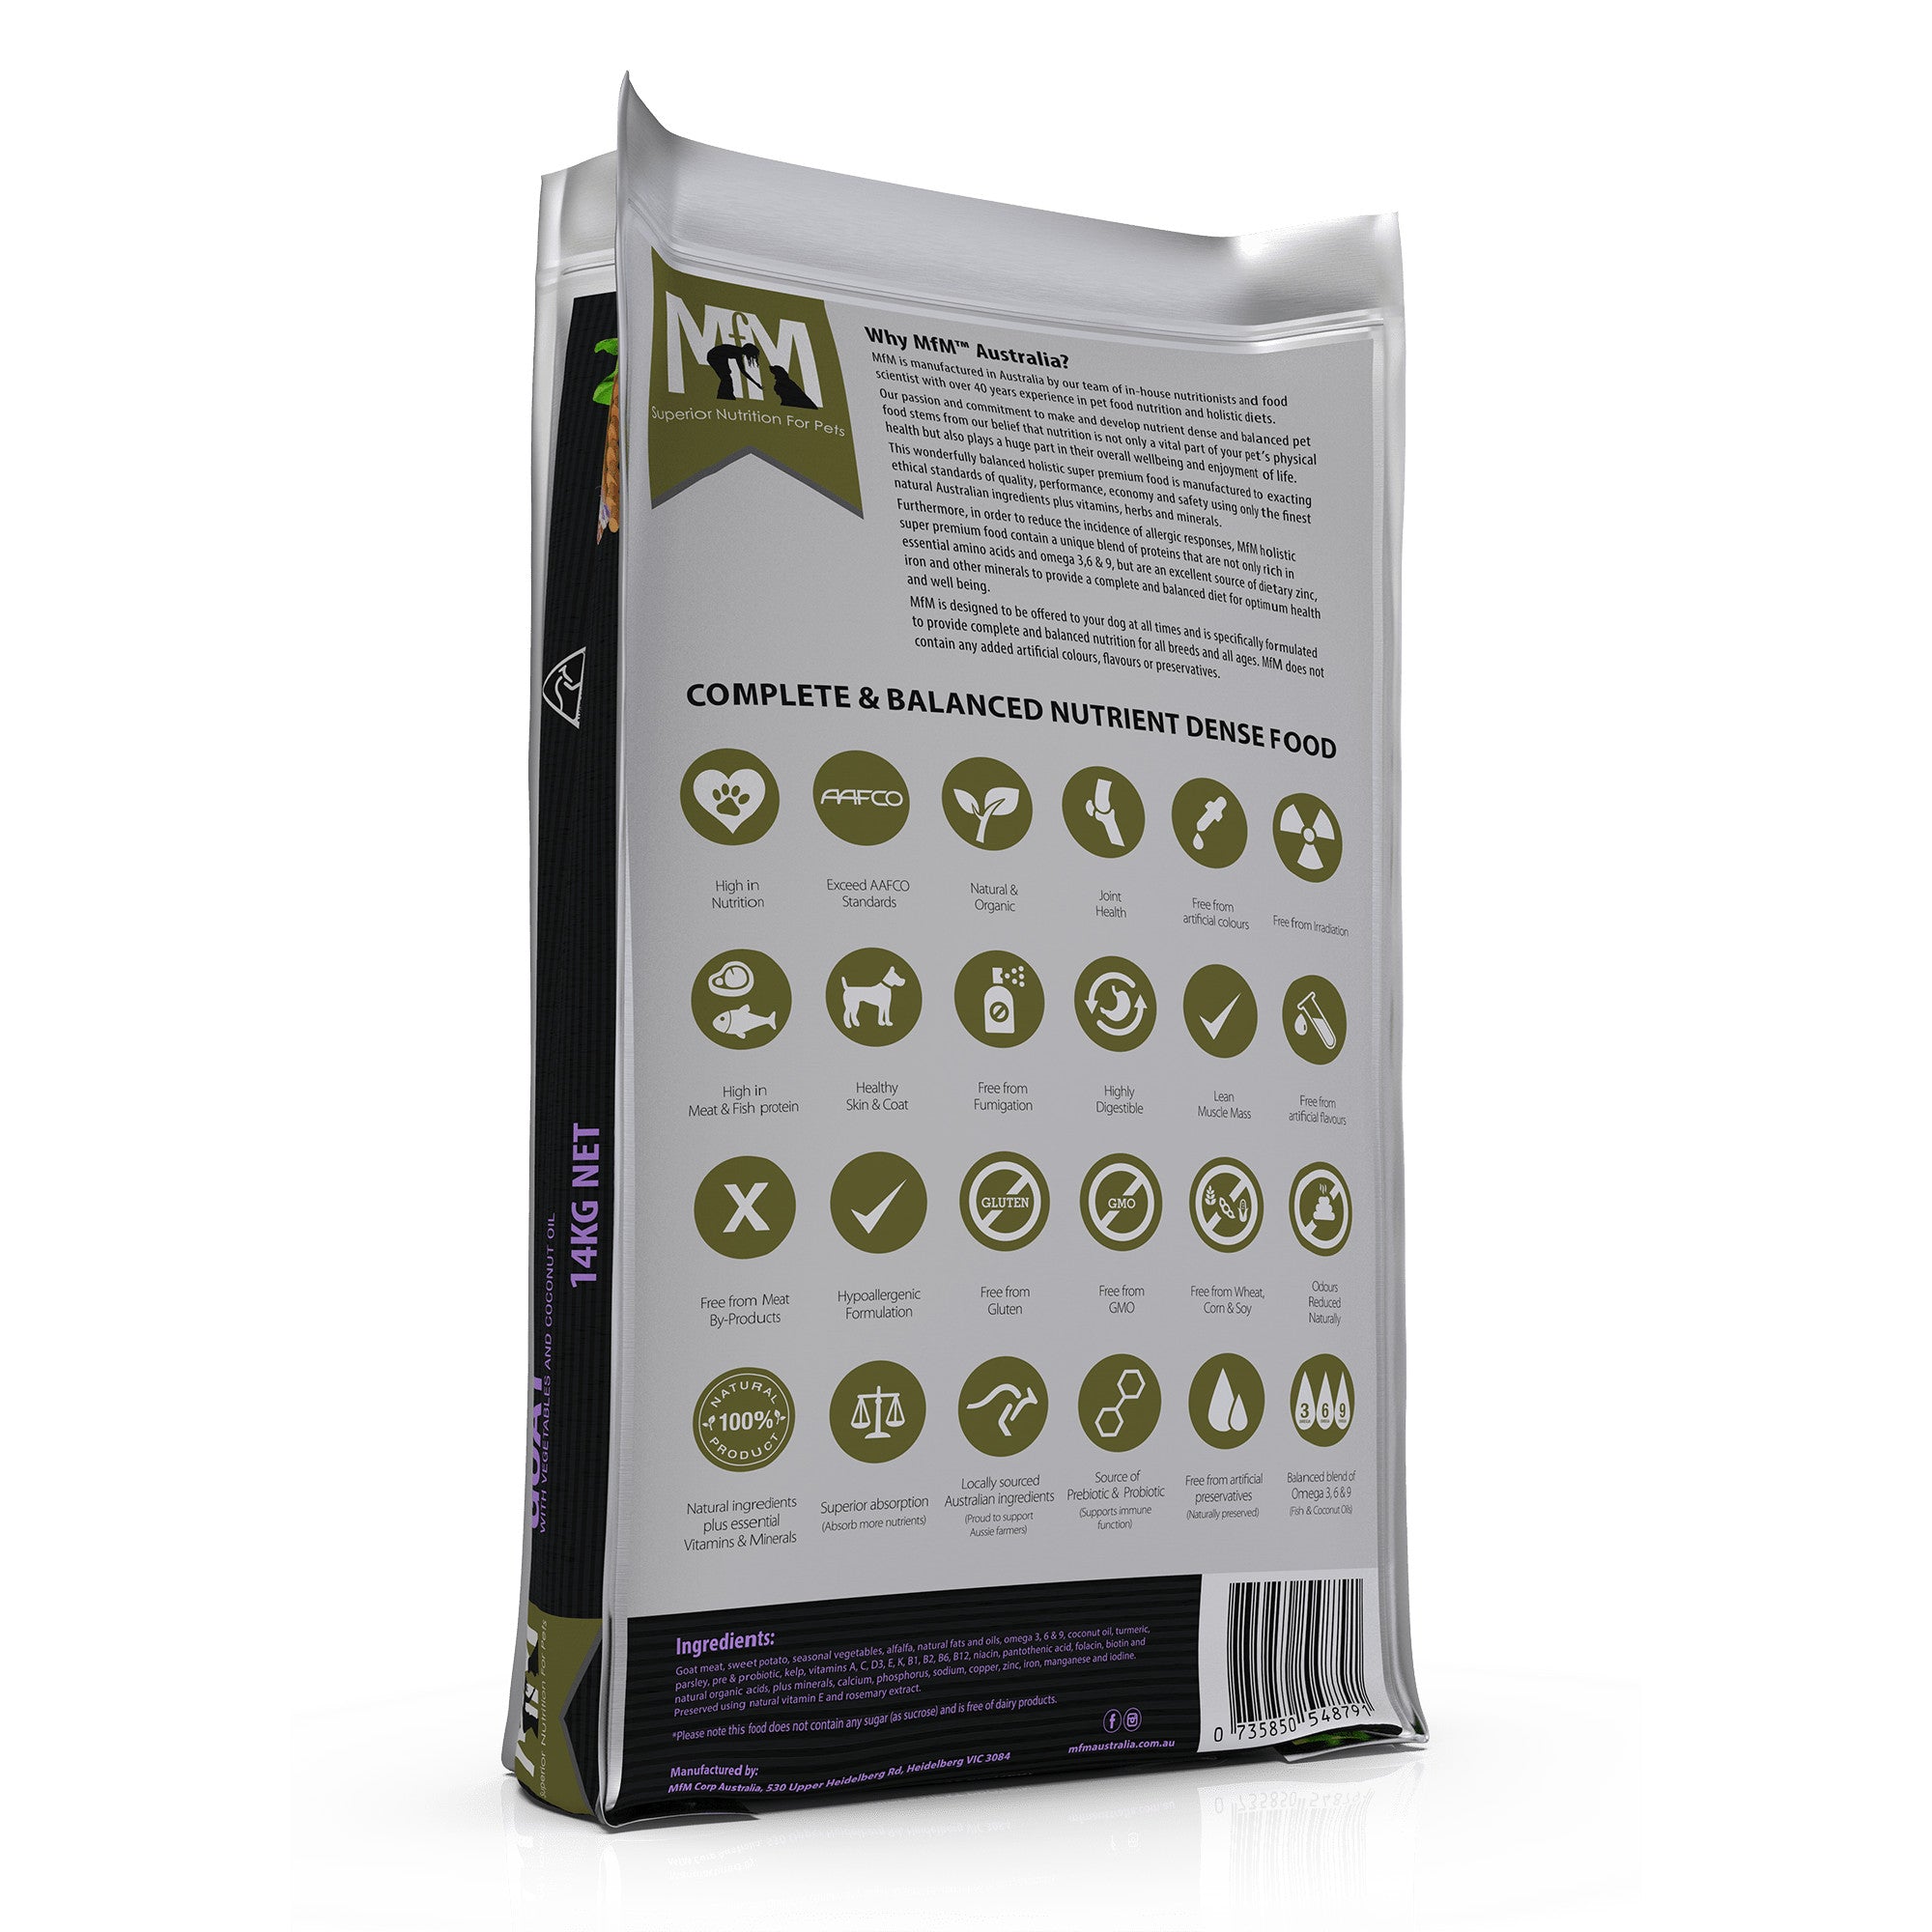 Meals for Mutts Goat Single Meat Protein Dog Food - Back.